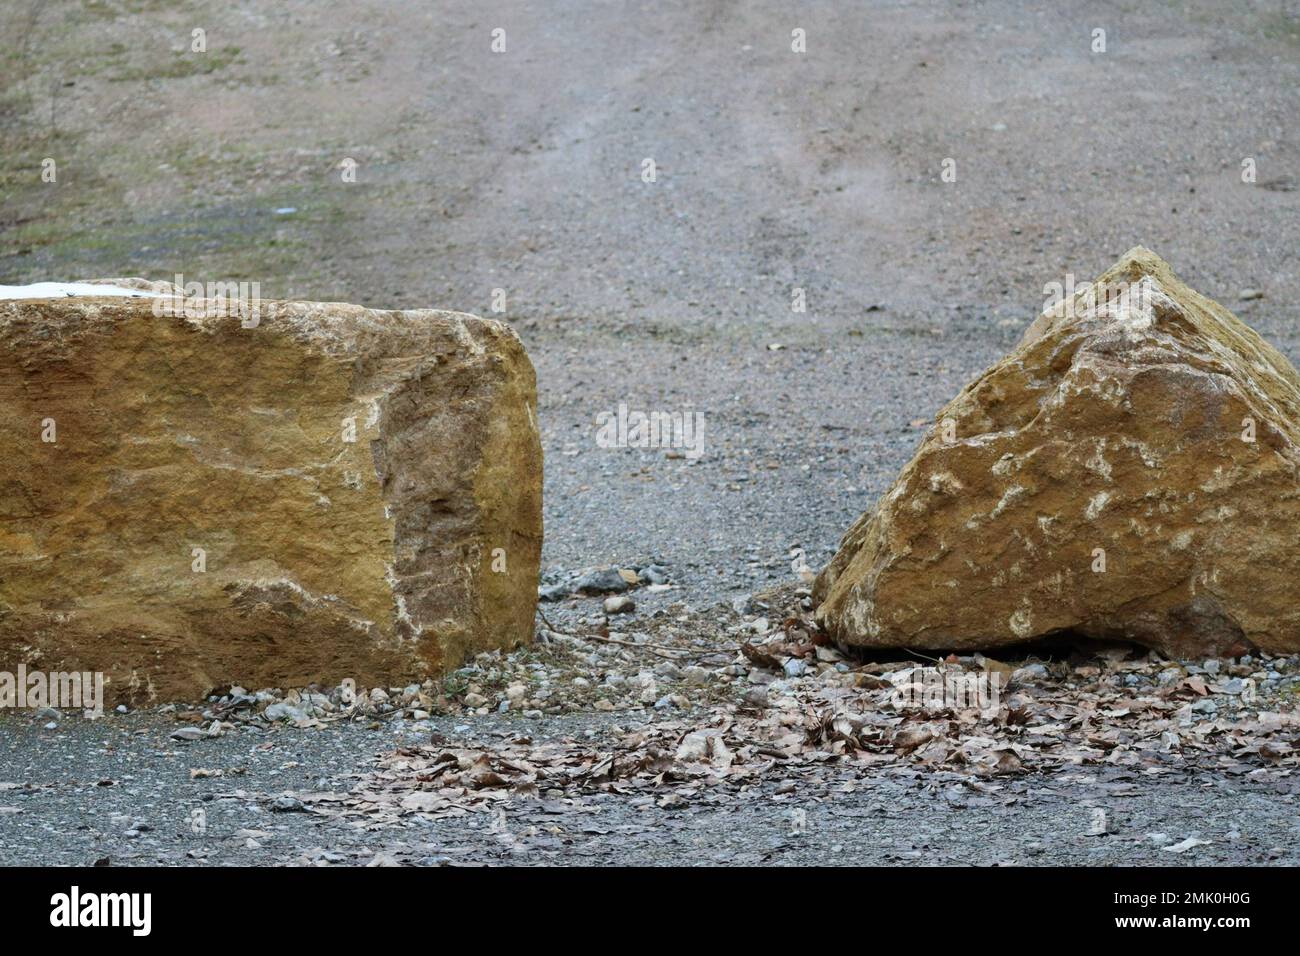 rectangular and triangular Stone as Entry barrier Stock Photo